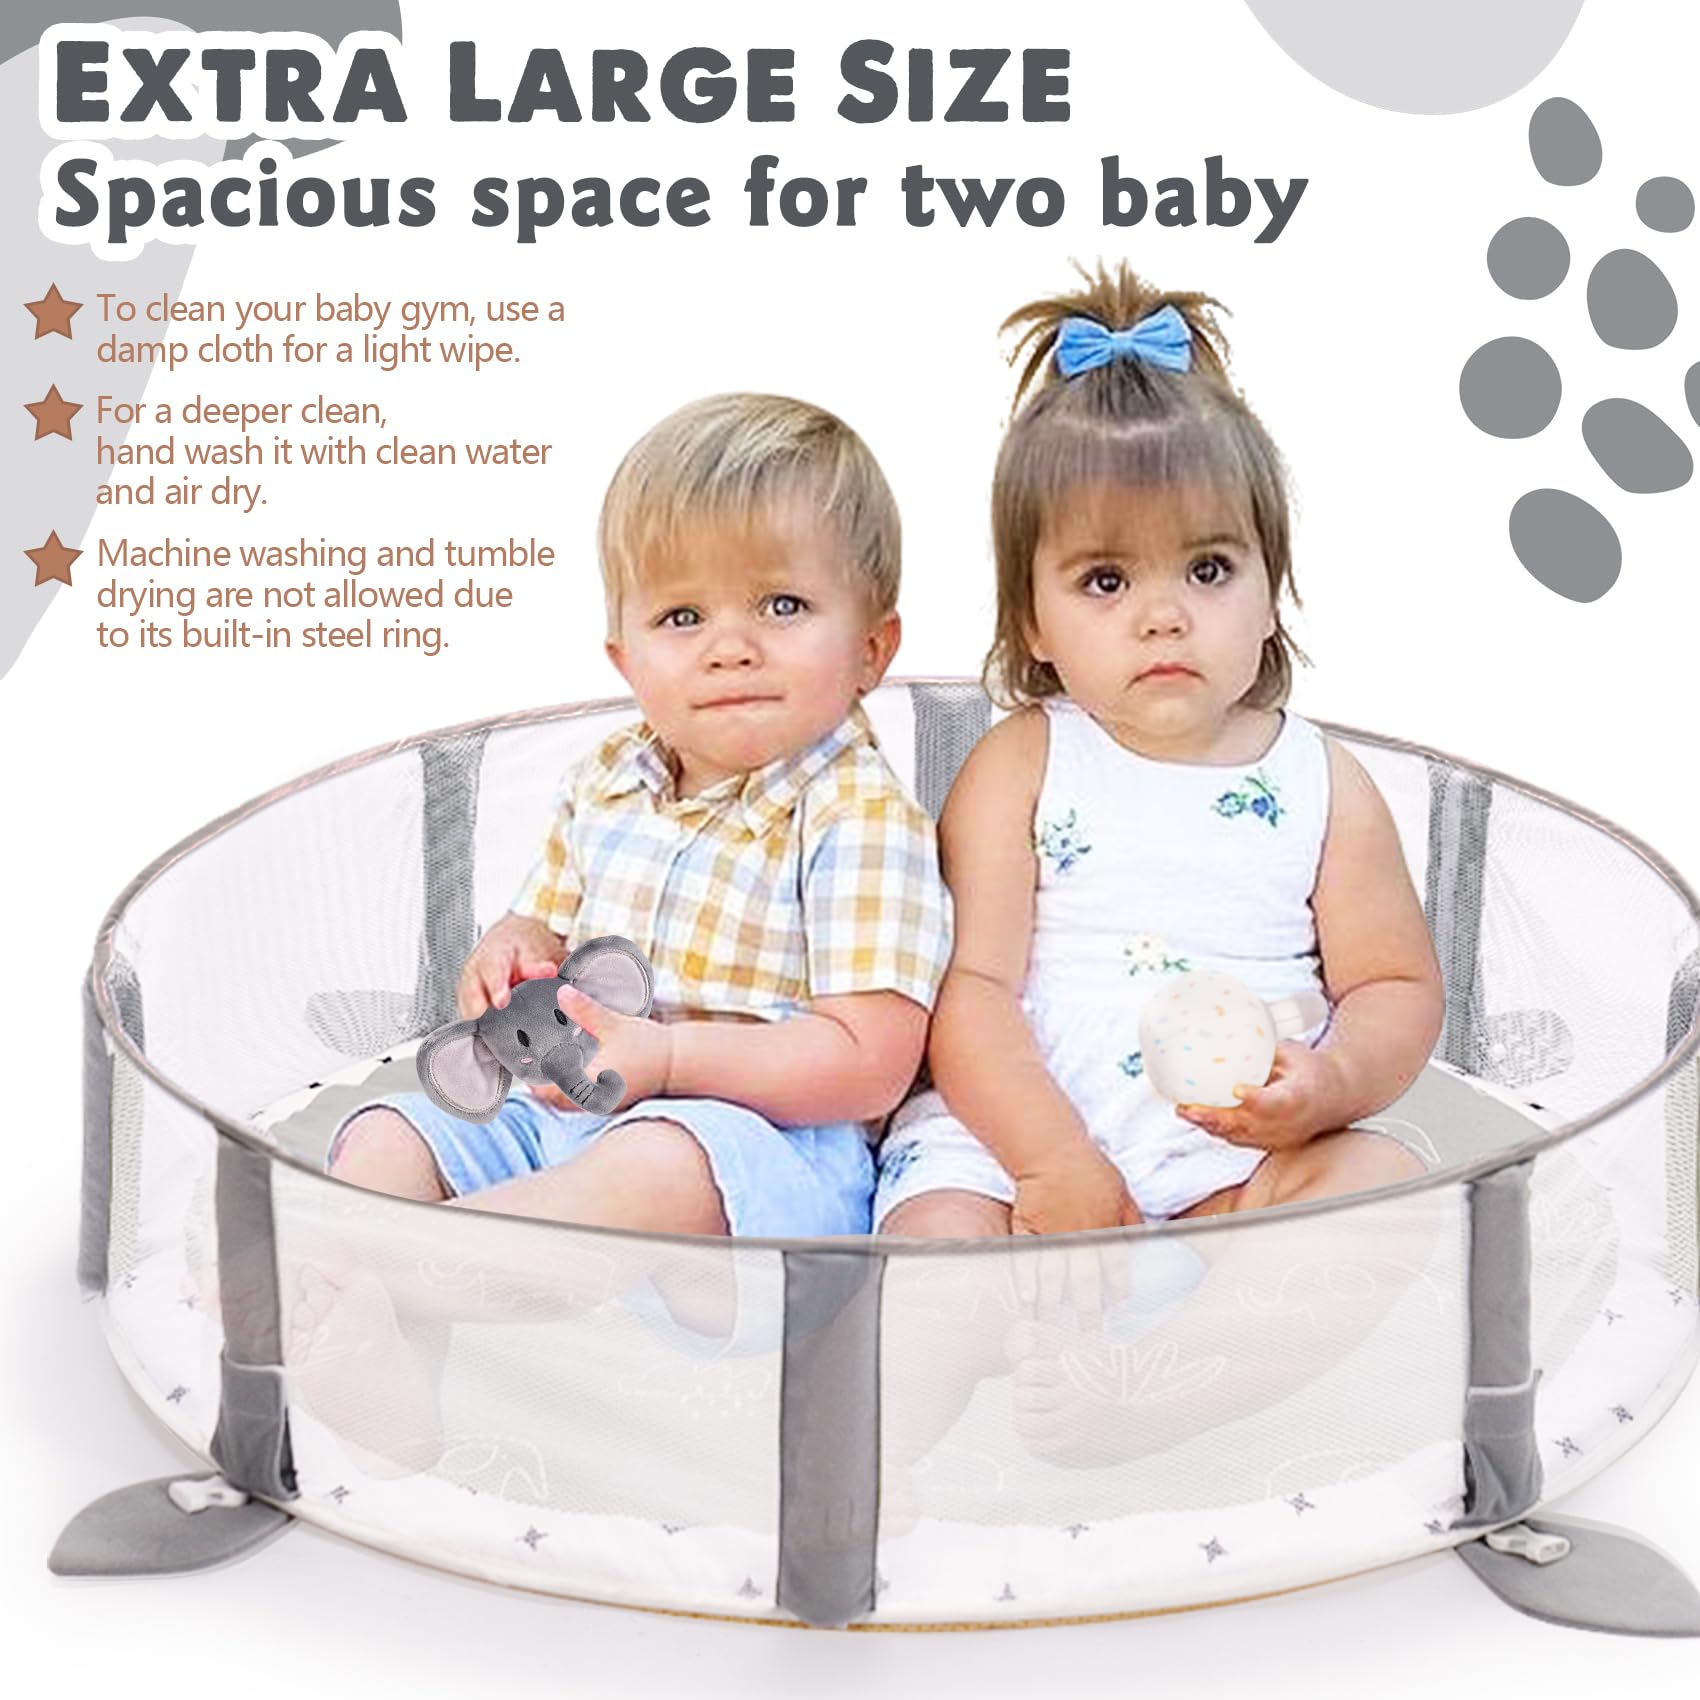 5-in-1 XL Large Baby Gym & Ball Pit, Play Mat & Play Gym, Combination Baby Activity Gym with Milestone Cards for Sensory Exploration and Motor Skill Development, Balls are not Included